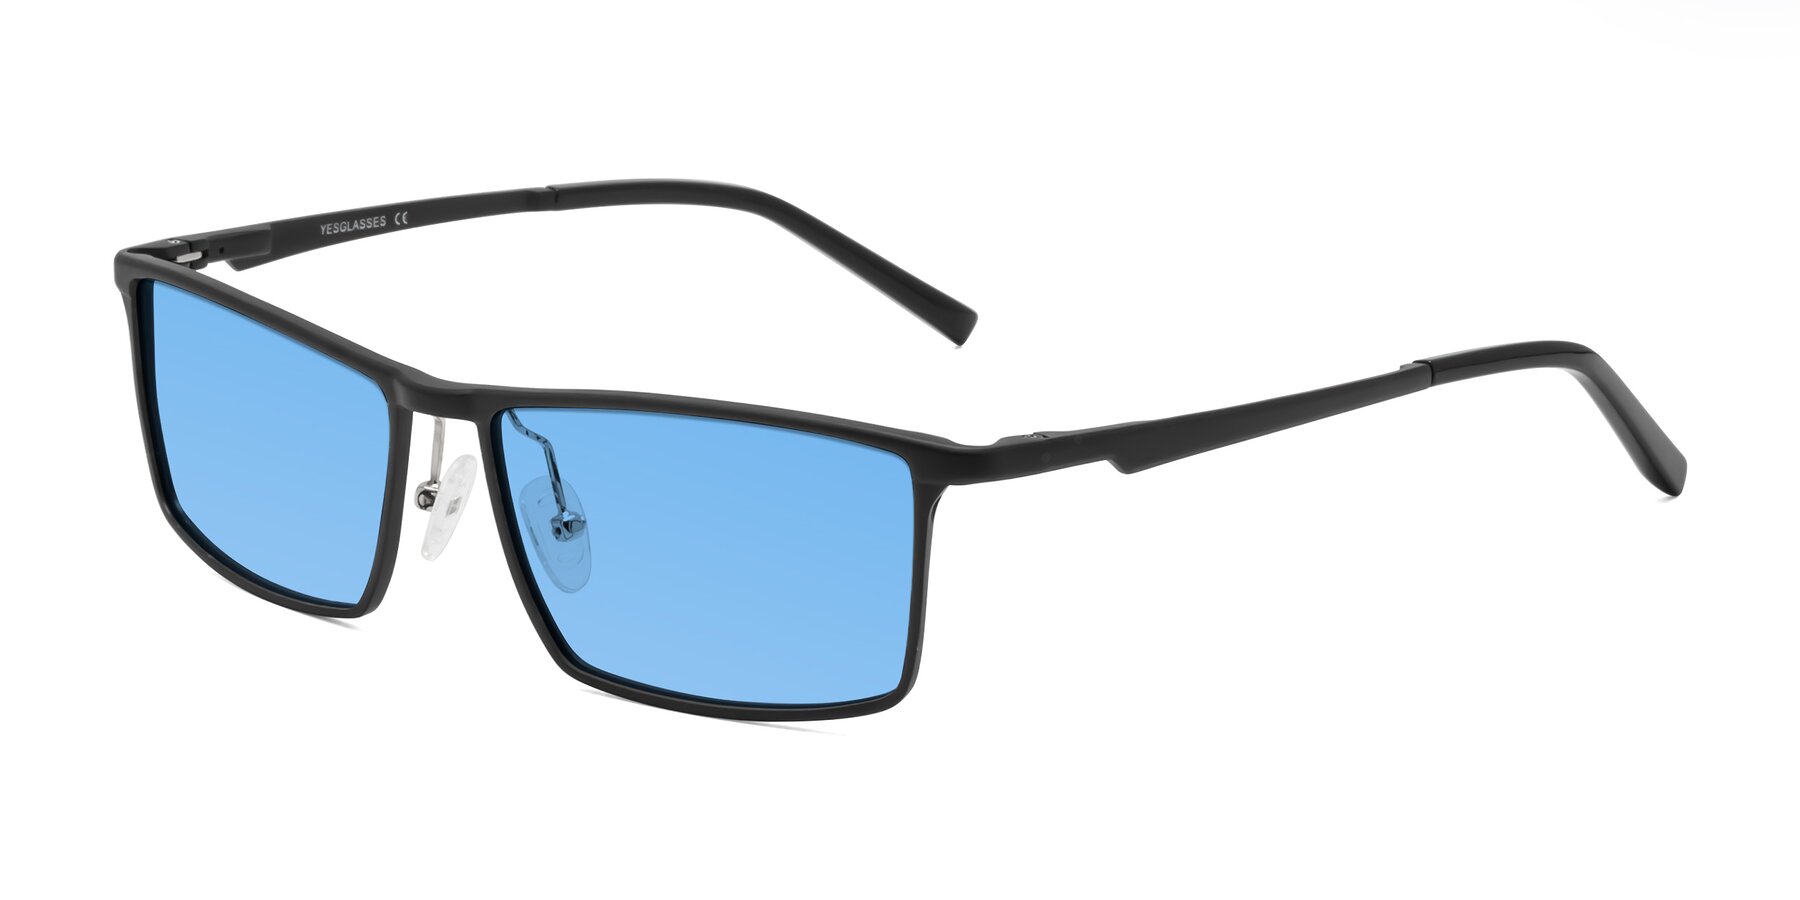 Angle of CX6330 in Black with Medium Blue Tinted Lenses